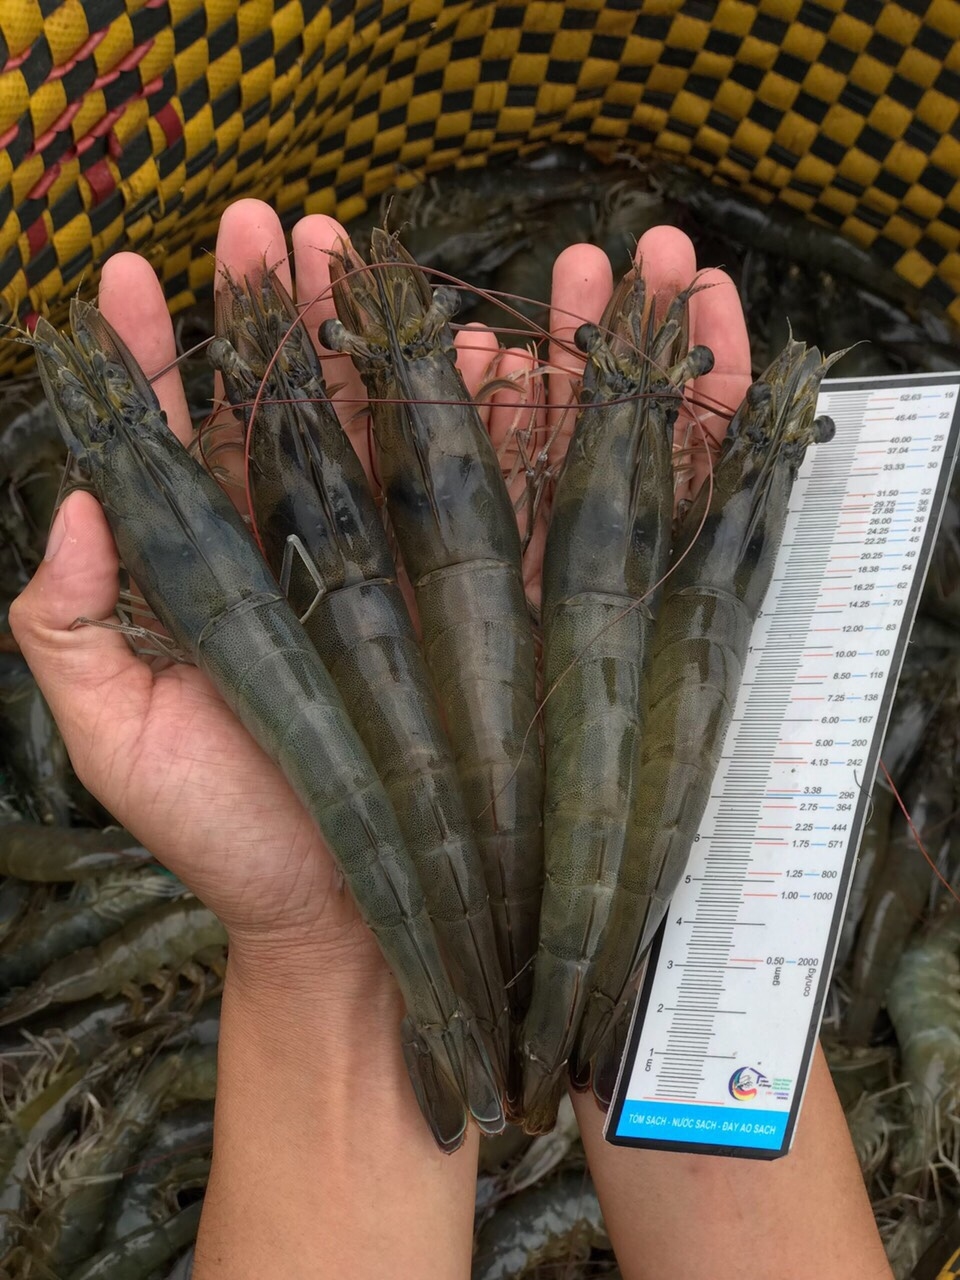 SHRIMP RAW MATERIAL PRICES ON FEBRUARY 28, 2021 IN MEKONG DELTA